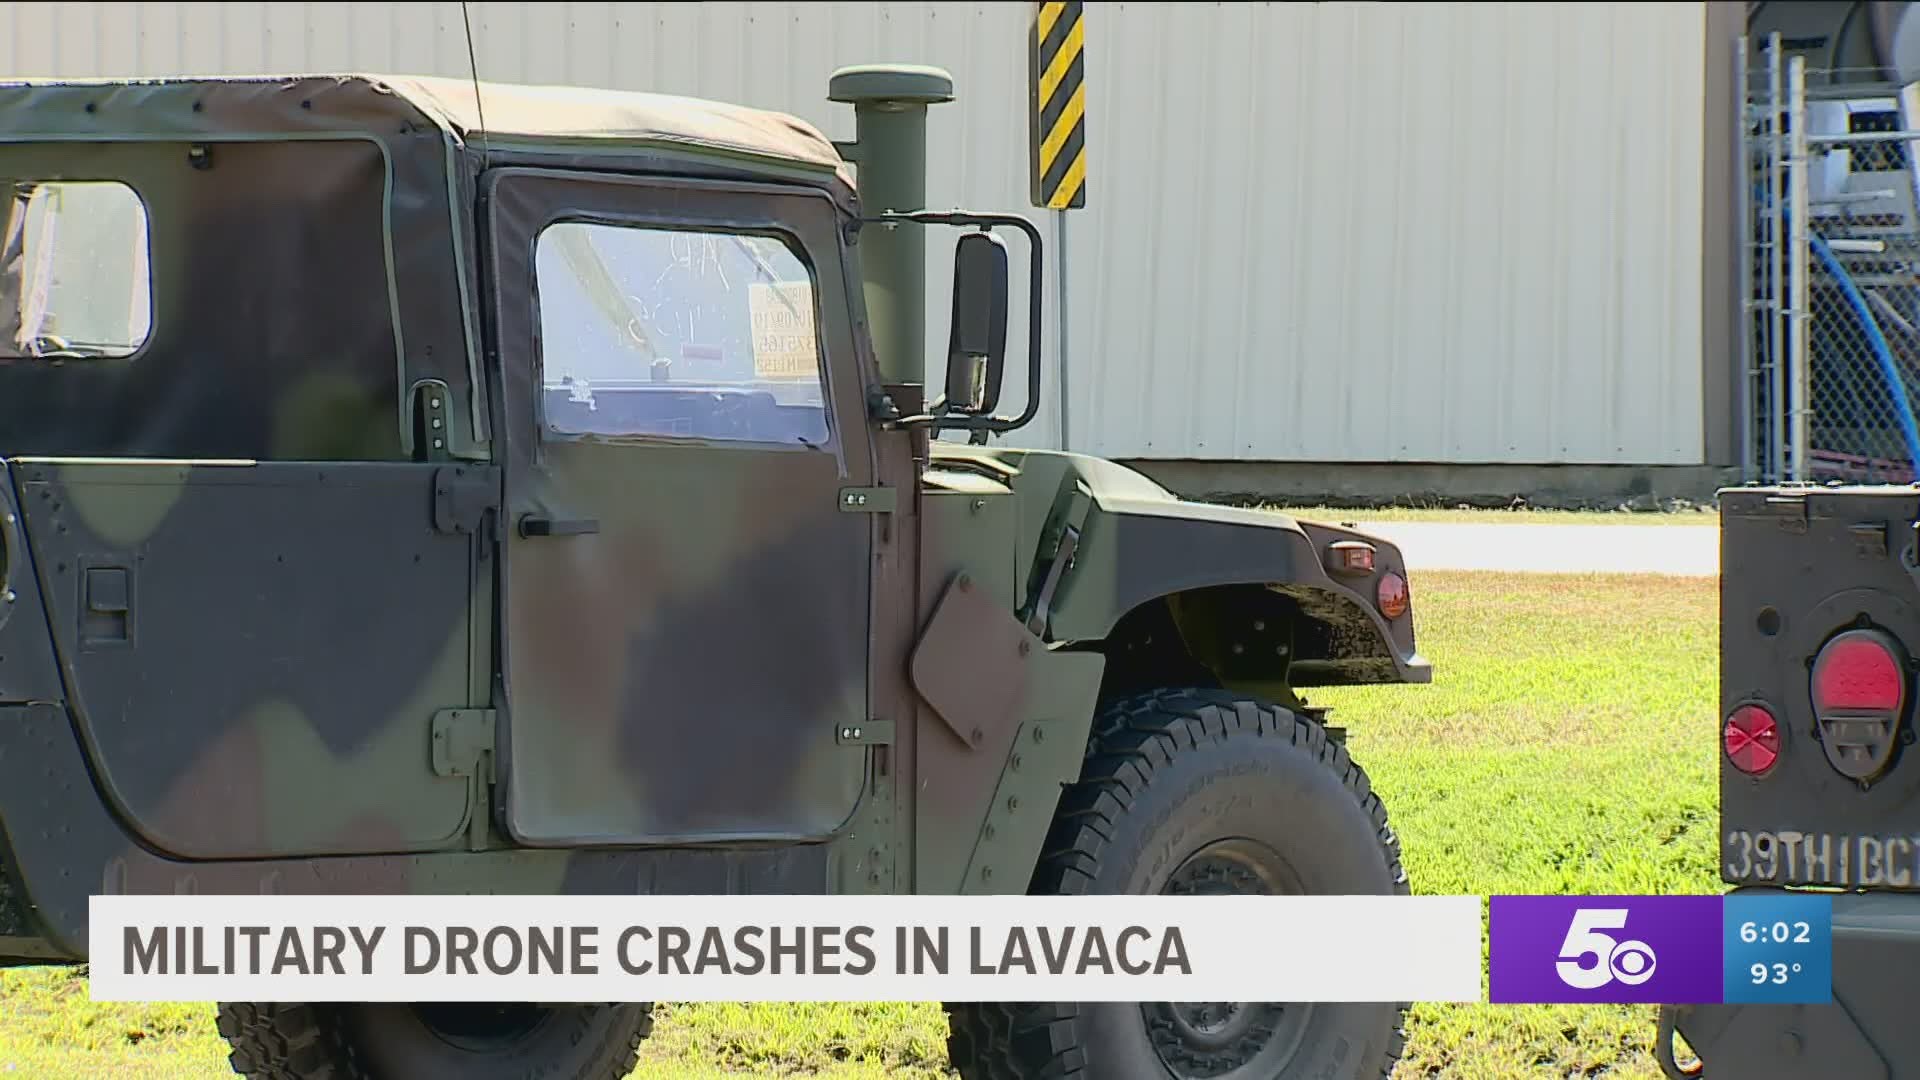 Witnesses told police they saw a military drone crash in Lavaca city limits on Tuesday. https://bit.ly/32paXBw